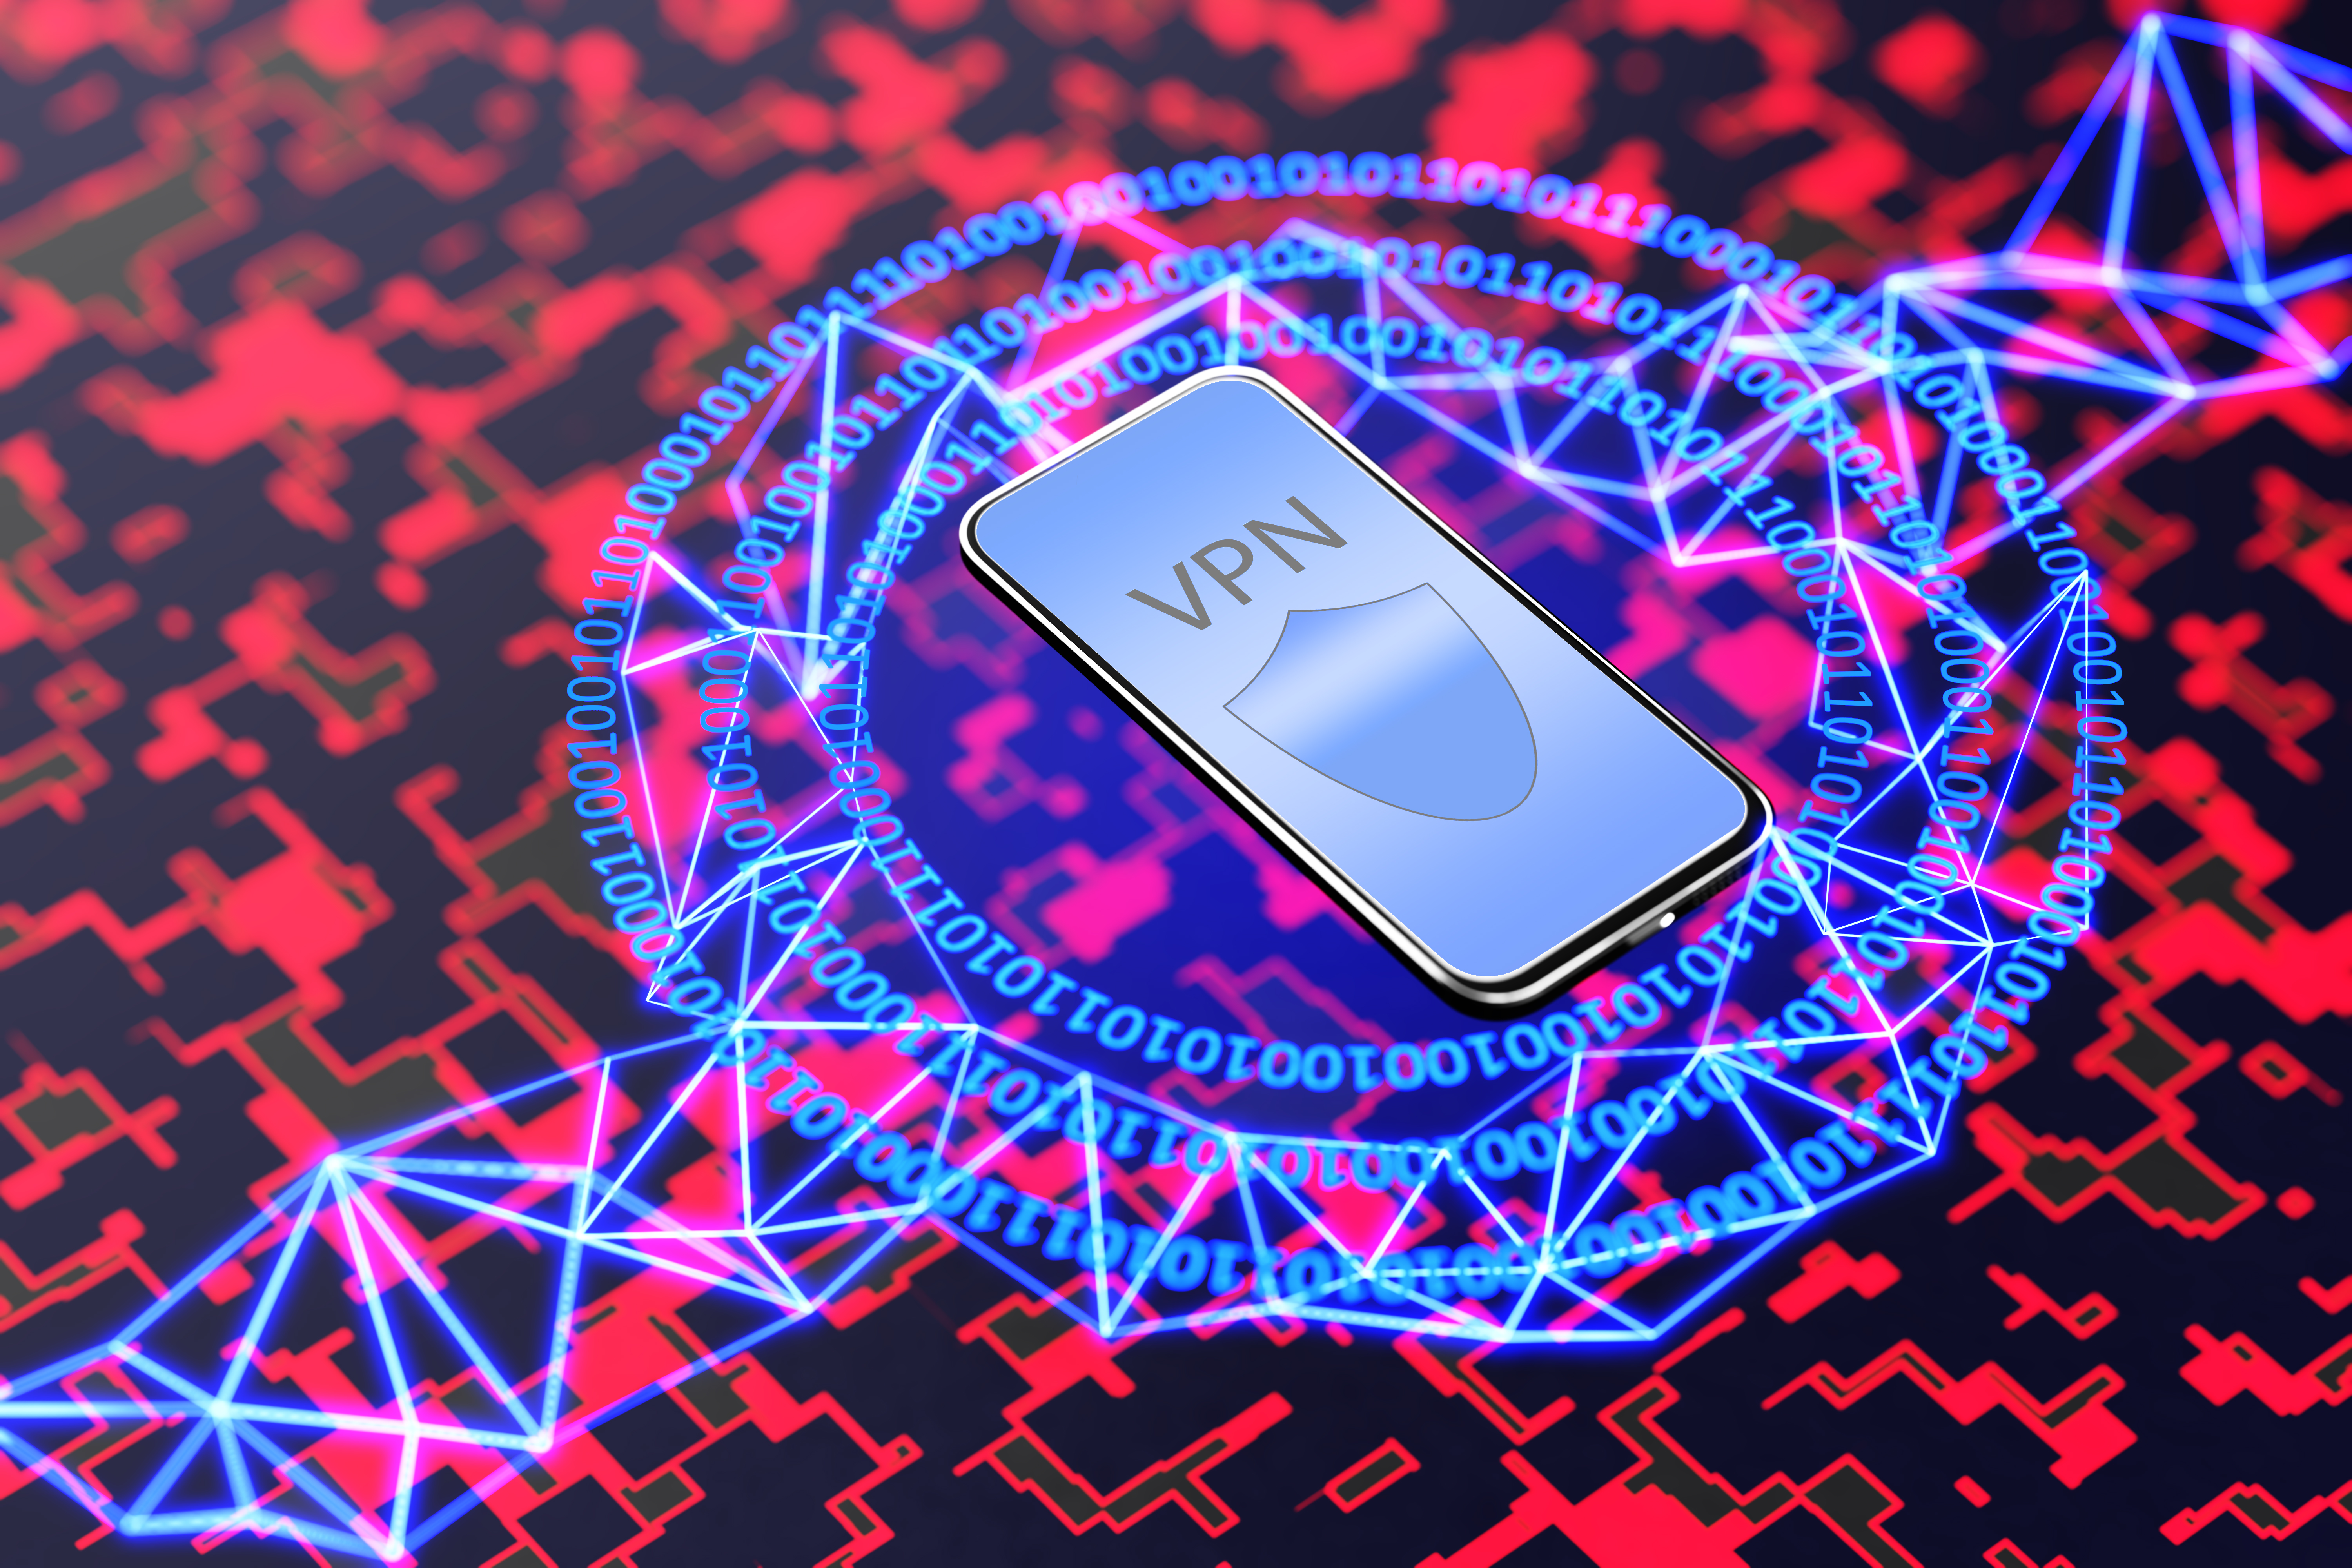 Ensuring secure Crypto transactions with proxy VPNs